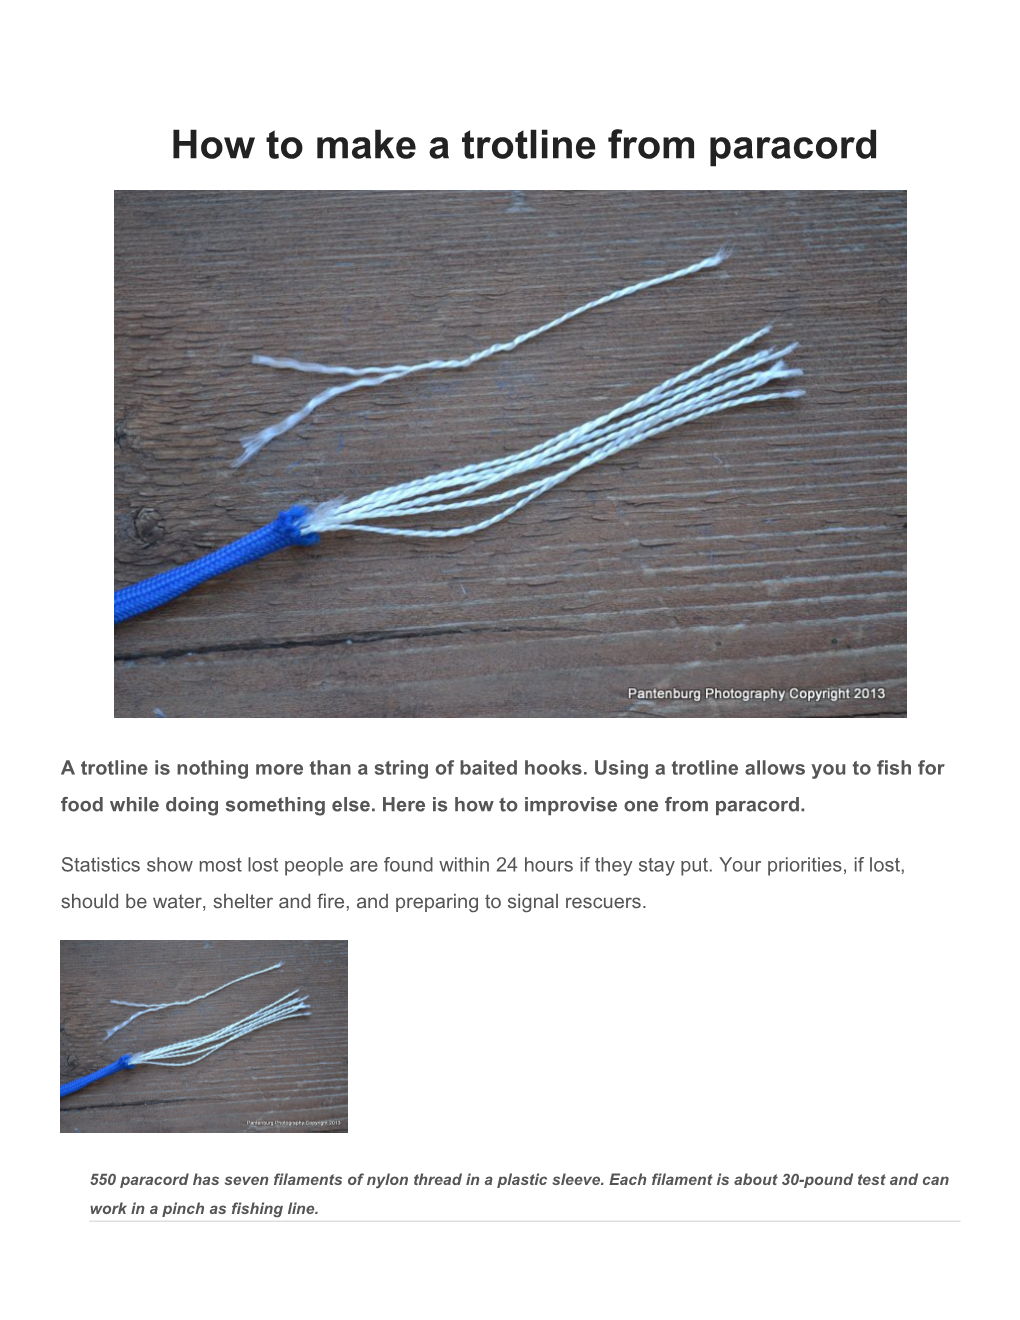 How to Make a Trotline from Paracord